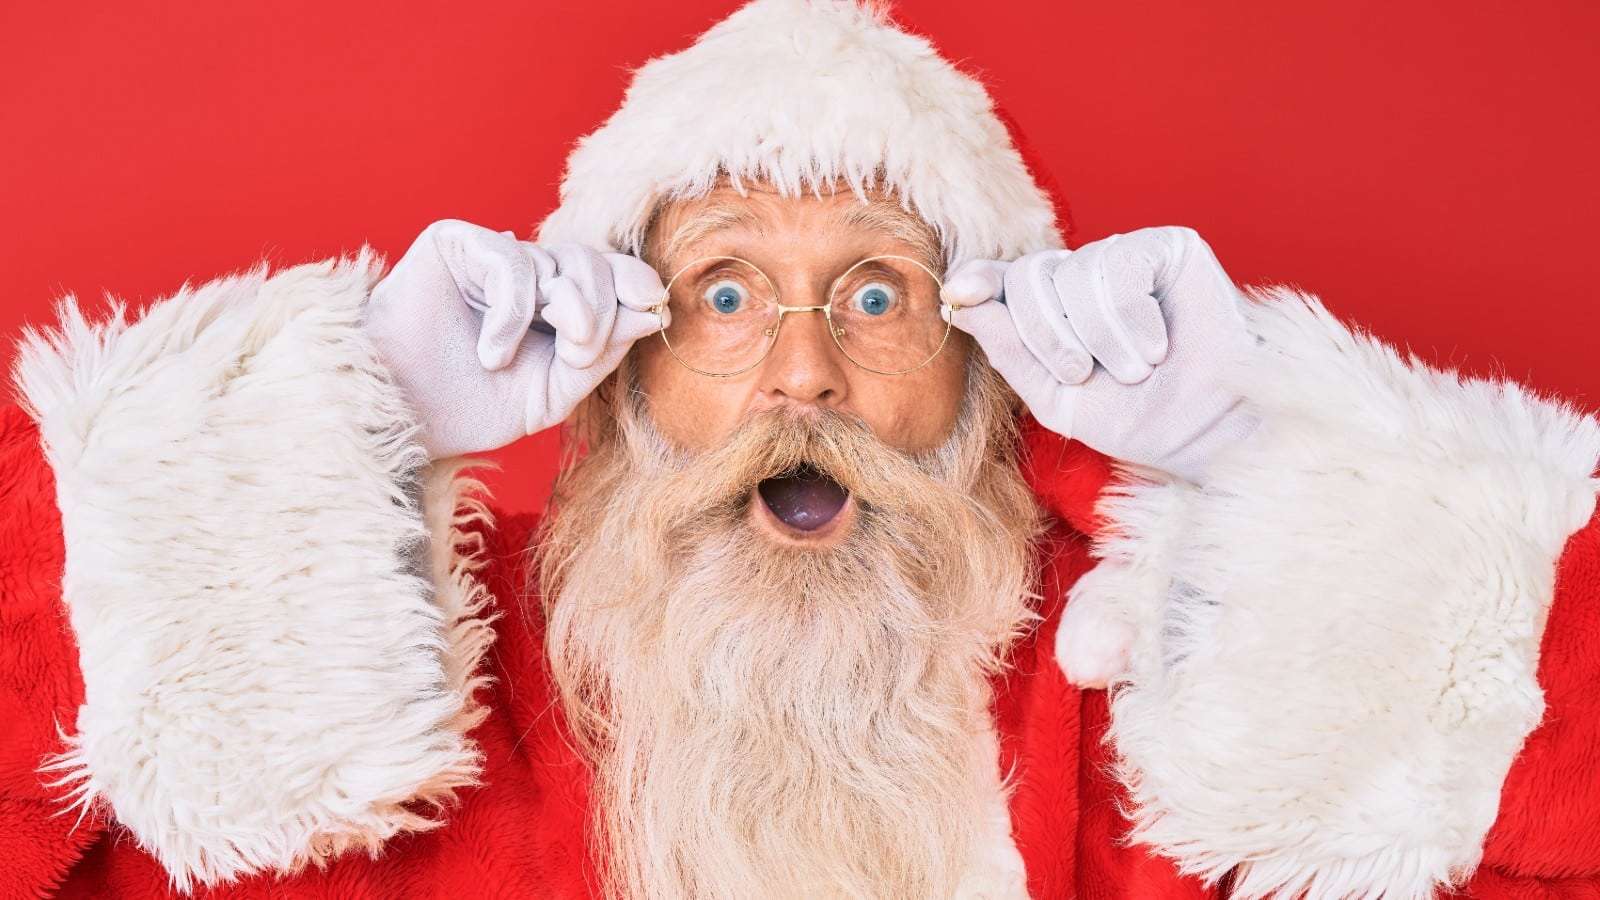 Santa holding his glasses with an excited face